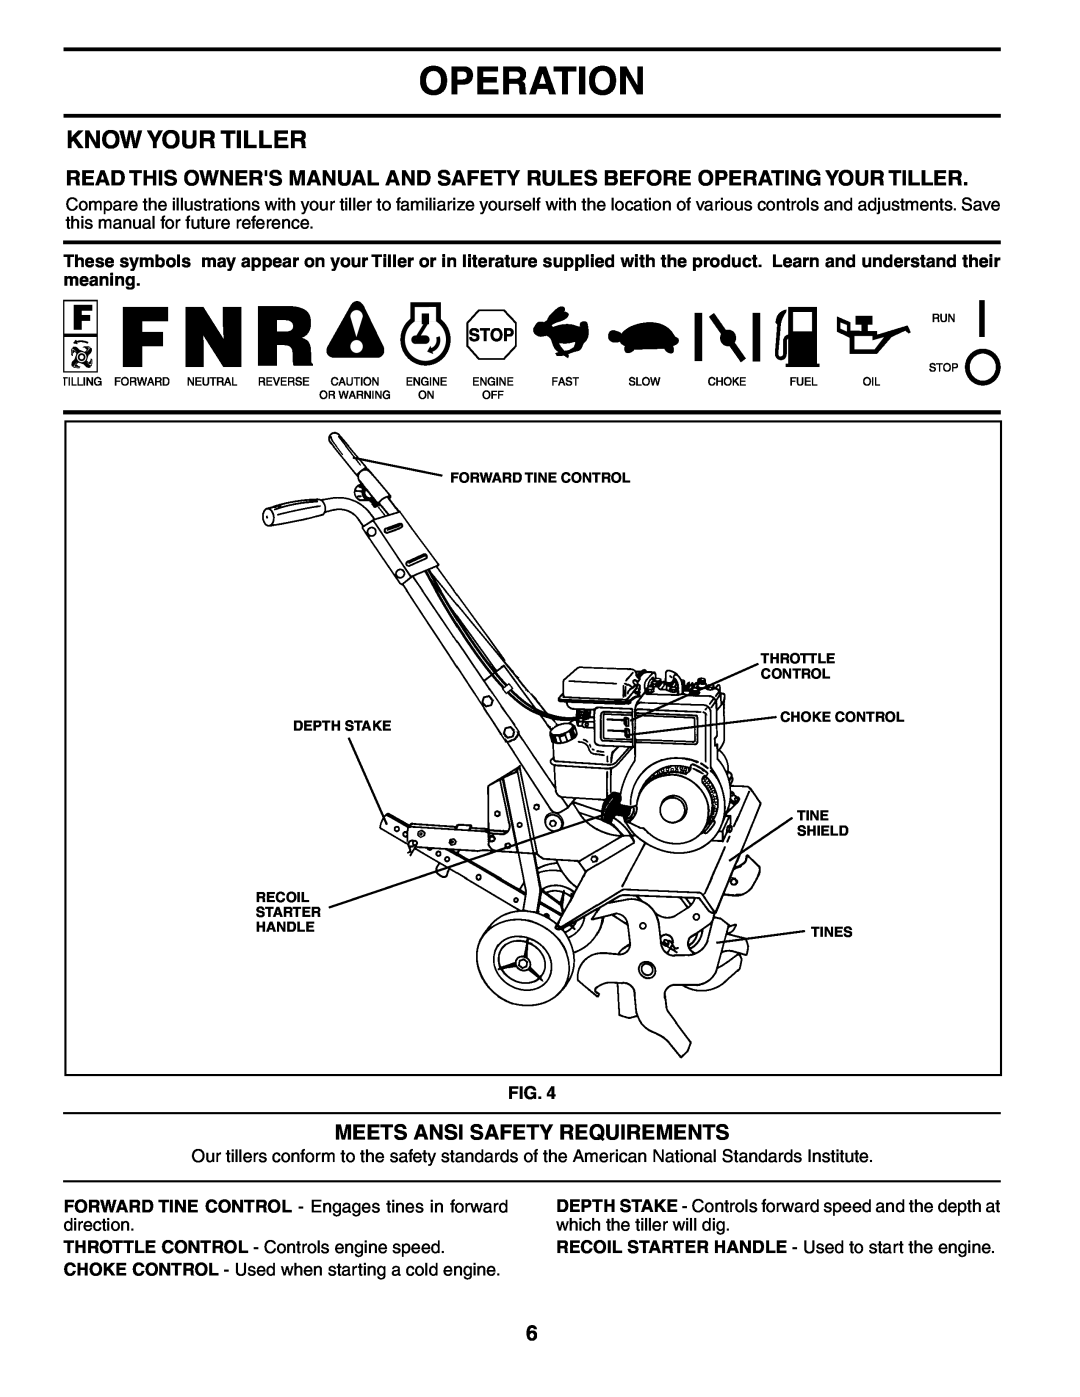 Electrolux FN620K owner manual Operation, Know Your Tiller, Meets Ansi Safety Requirements 